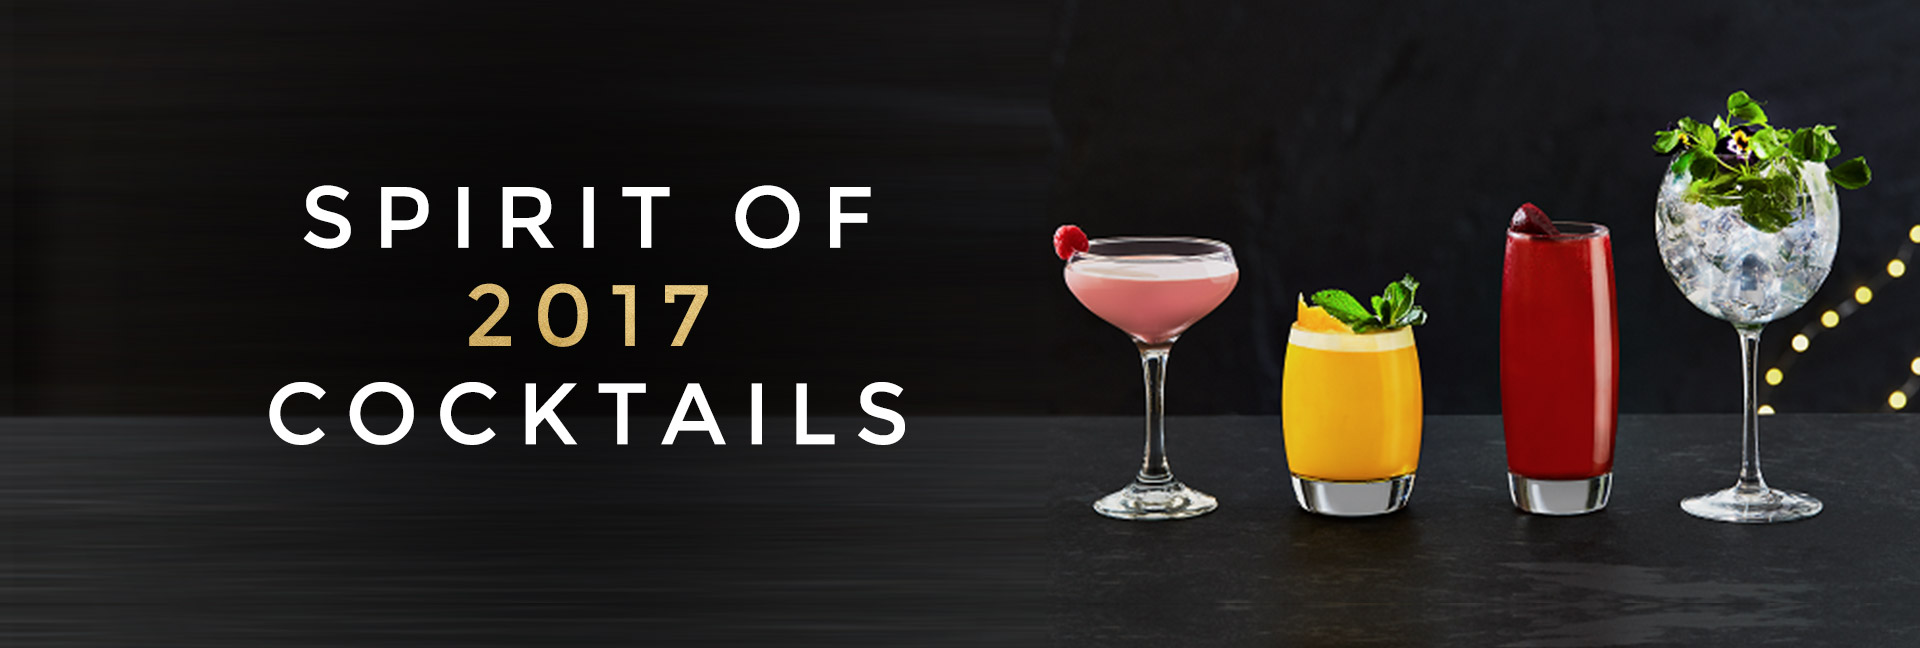 Spirit of 2017 cocktails at All Bar One Brighton